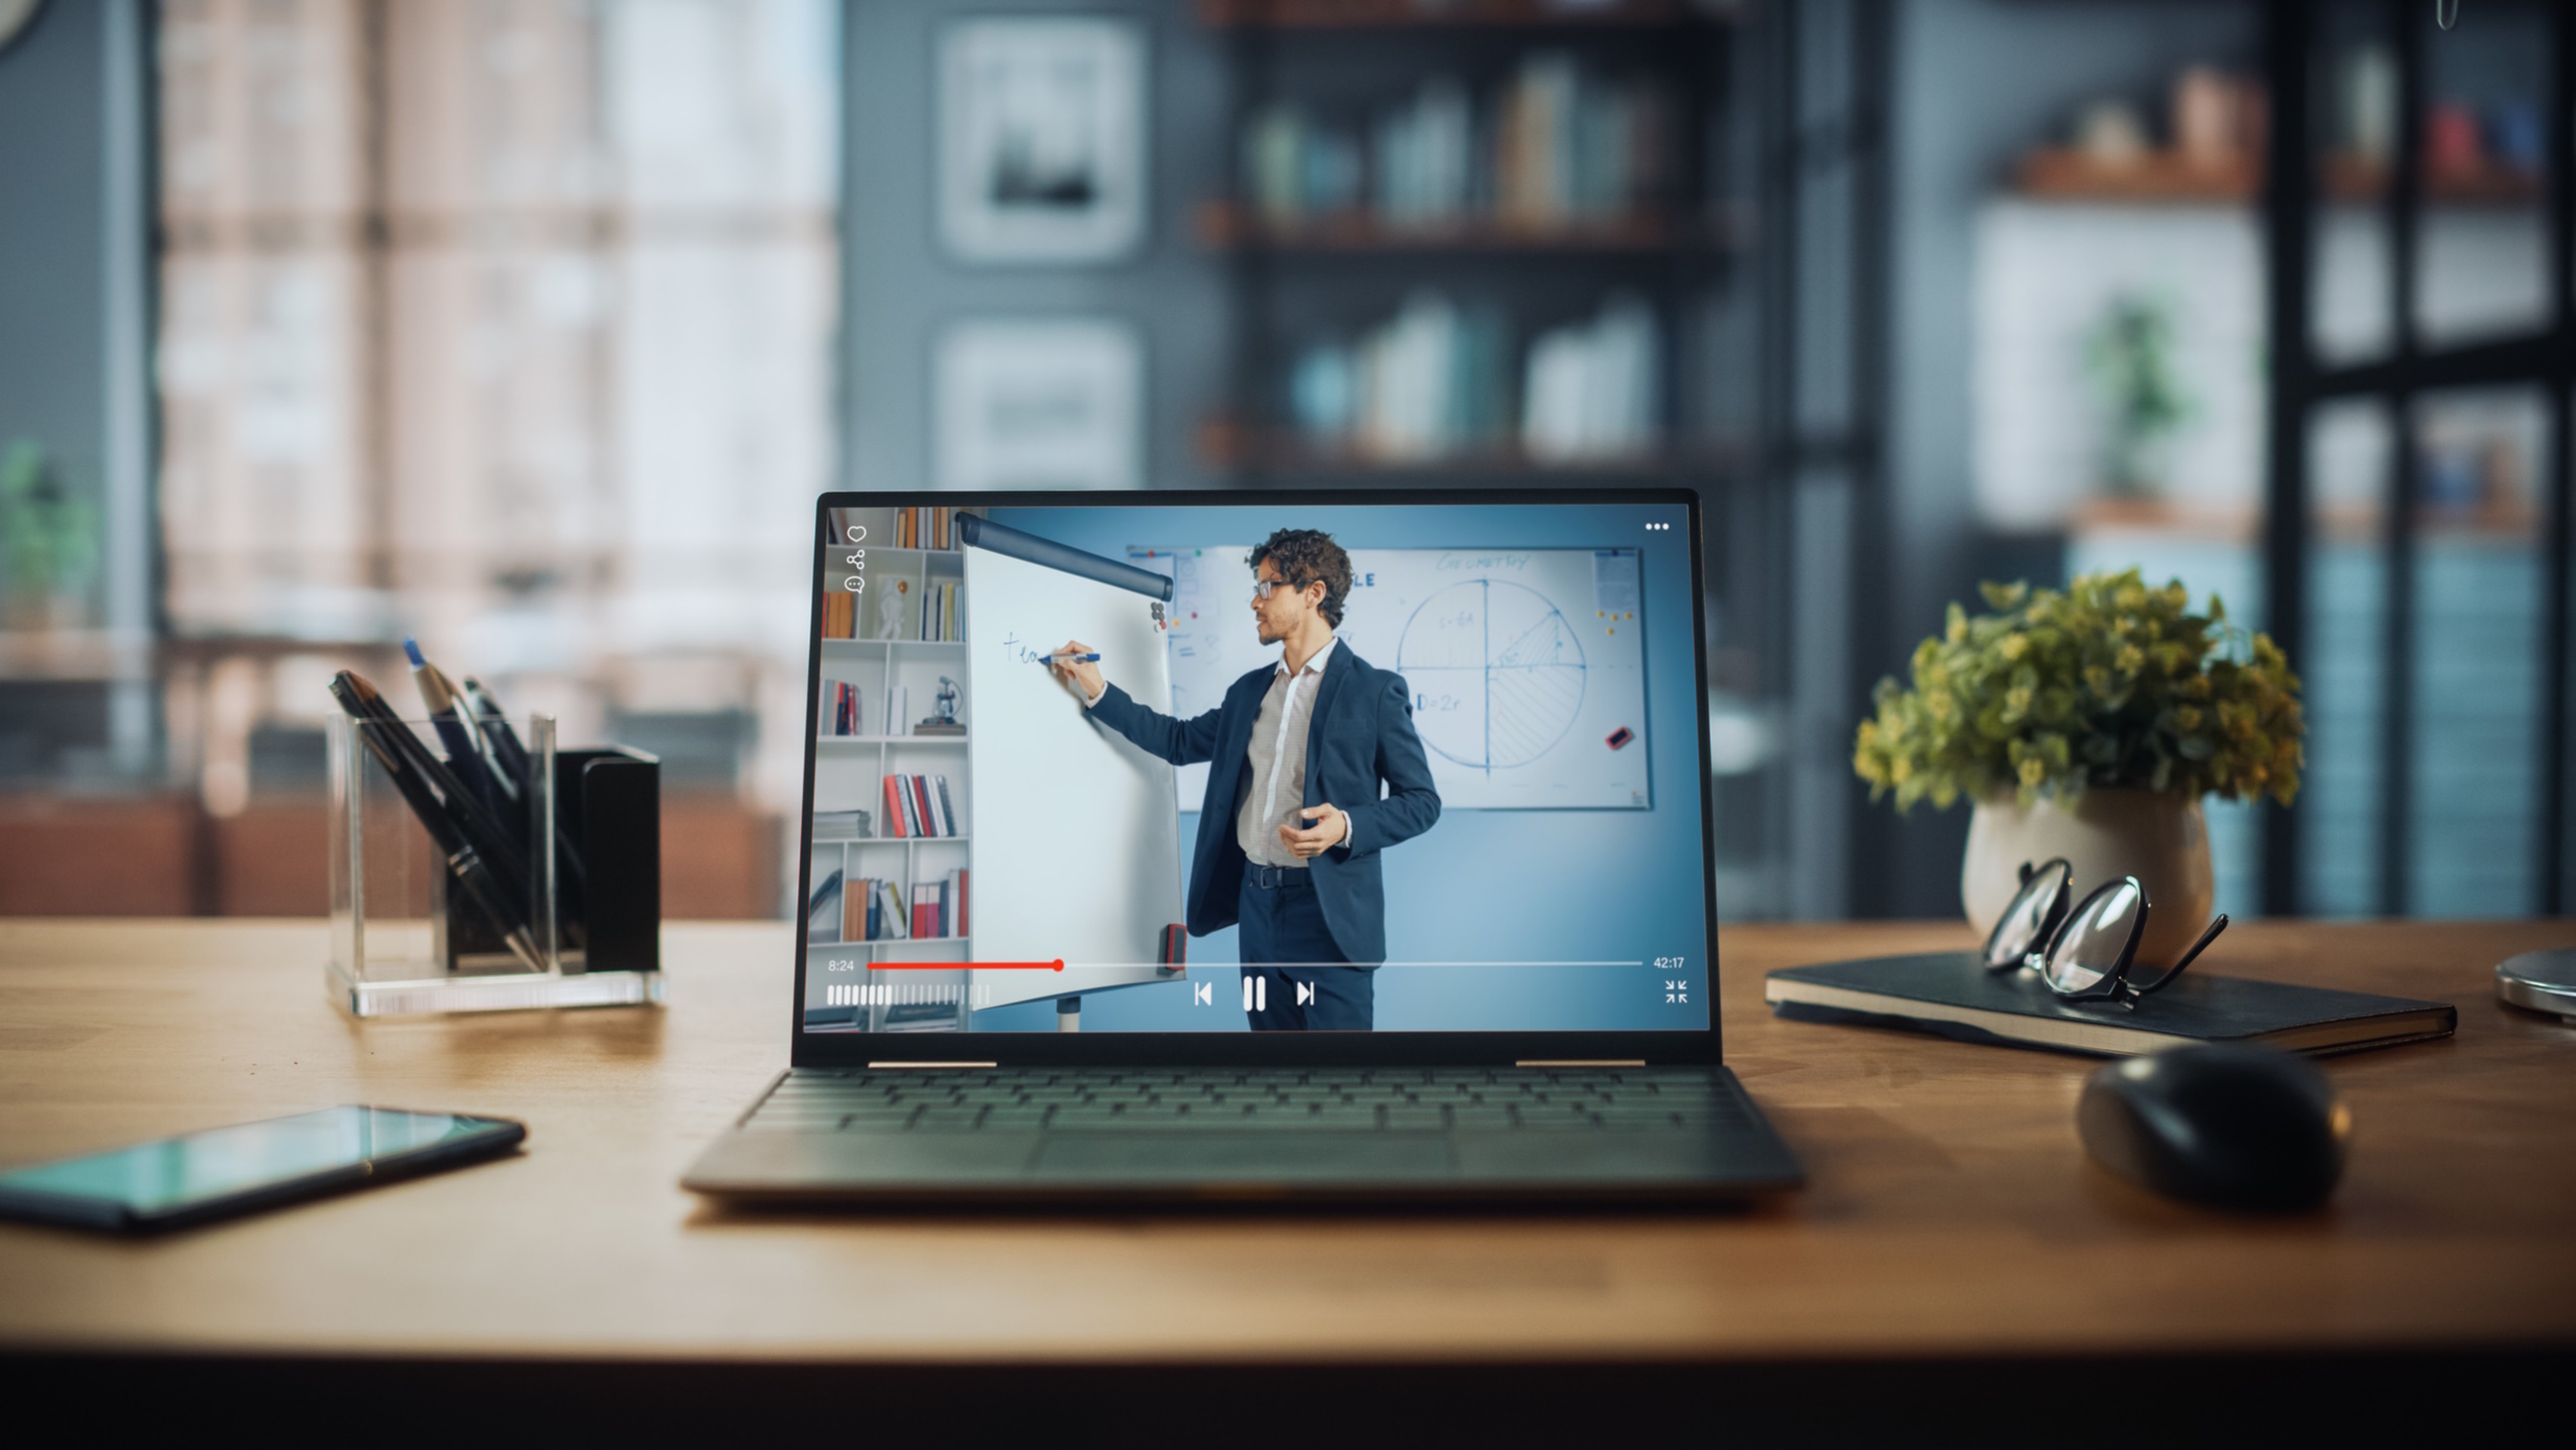 Shot of a Laptop Computer Showing Online Lecture with Portrait of a Cute Male Teacher Explaining Math Formulas. It is Standing on the Wooden Desk in Stylish Modern Home Office Studio During Day.